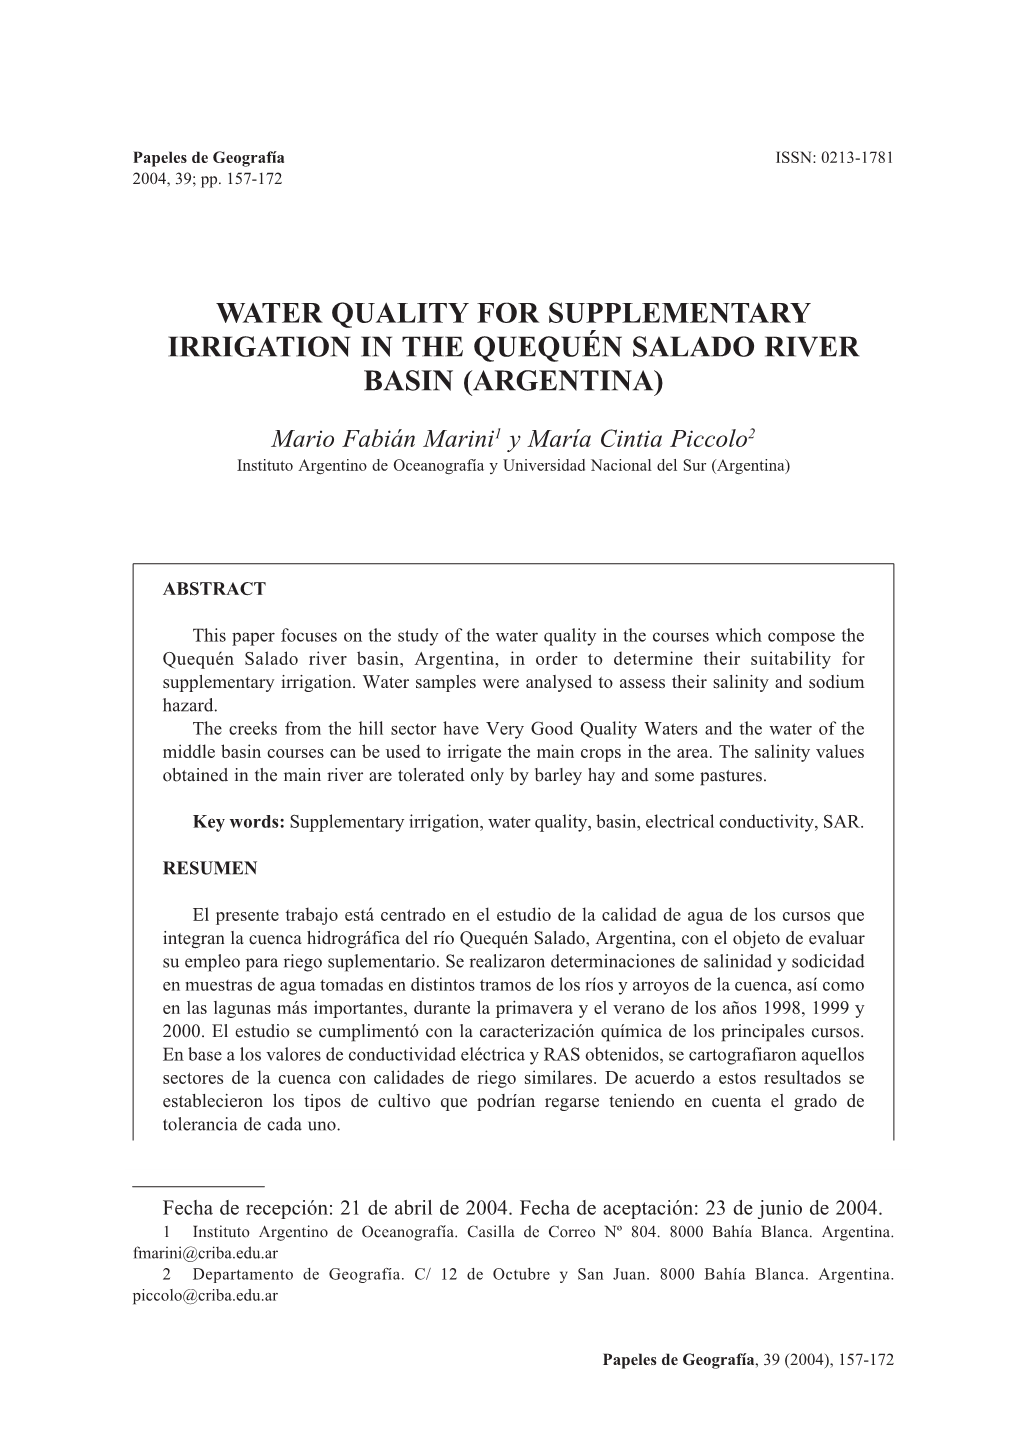 08-Water Quality